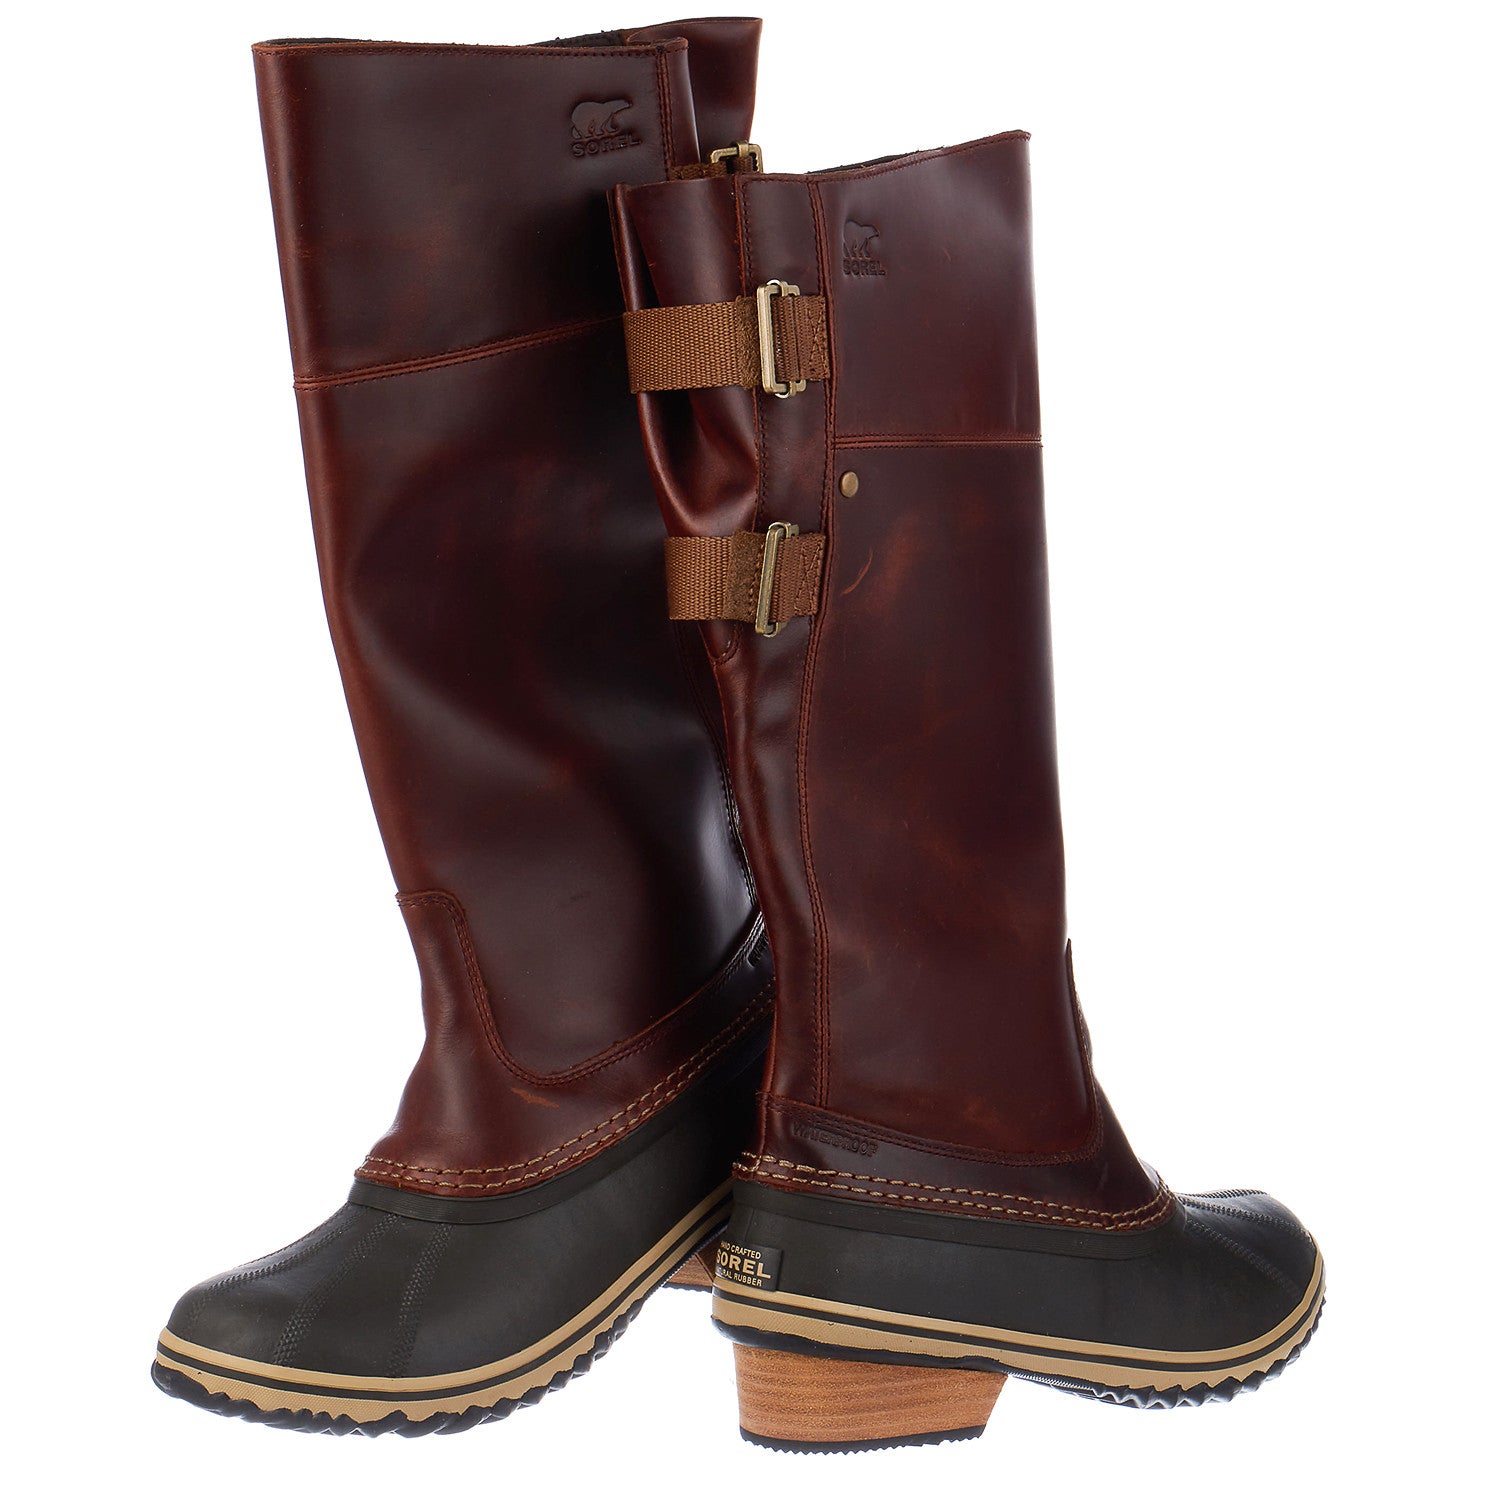 slimpack riding tall boot